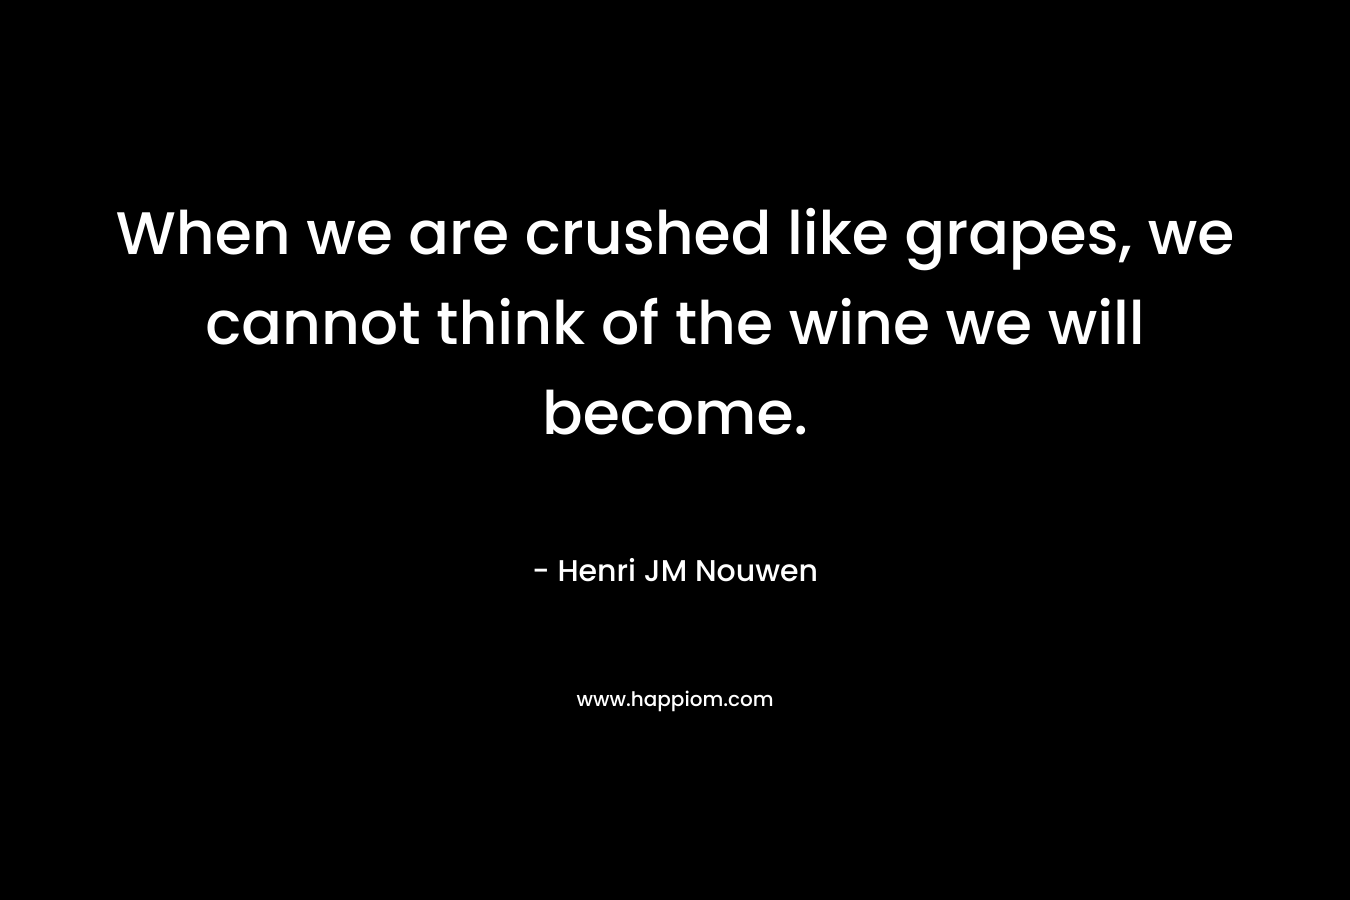 When we are crushed like grapes, we cannot think of the wine we will become.